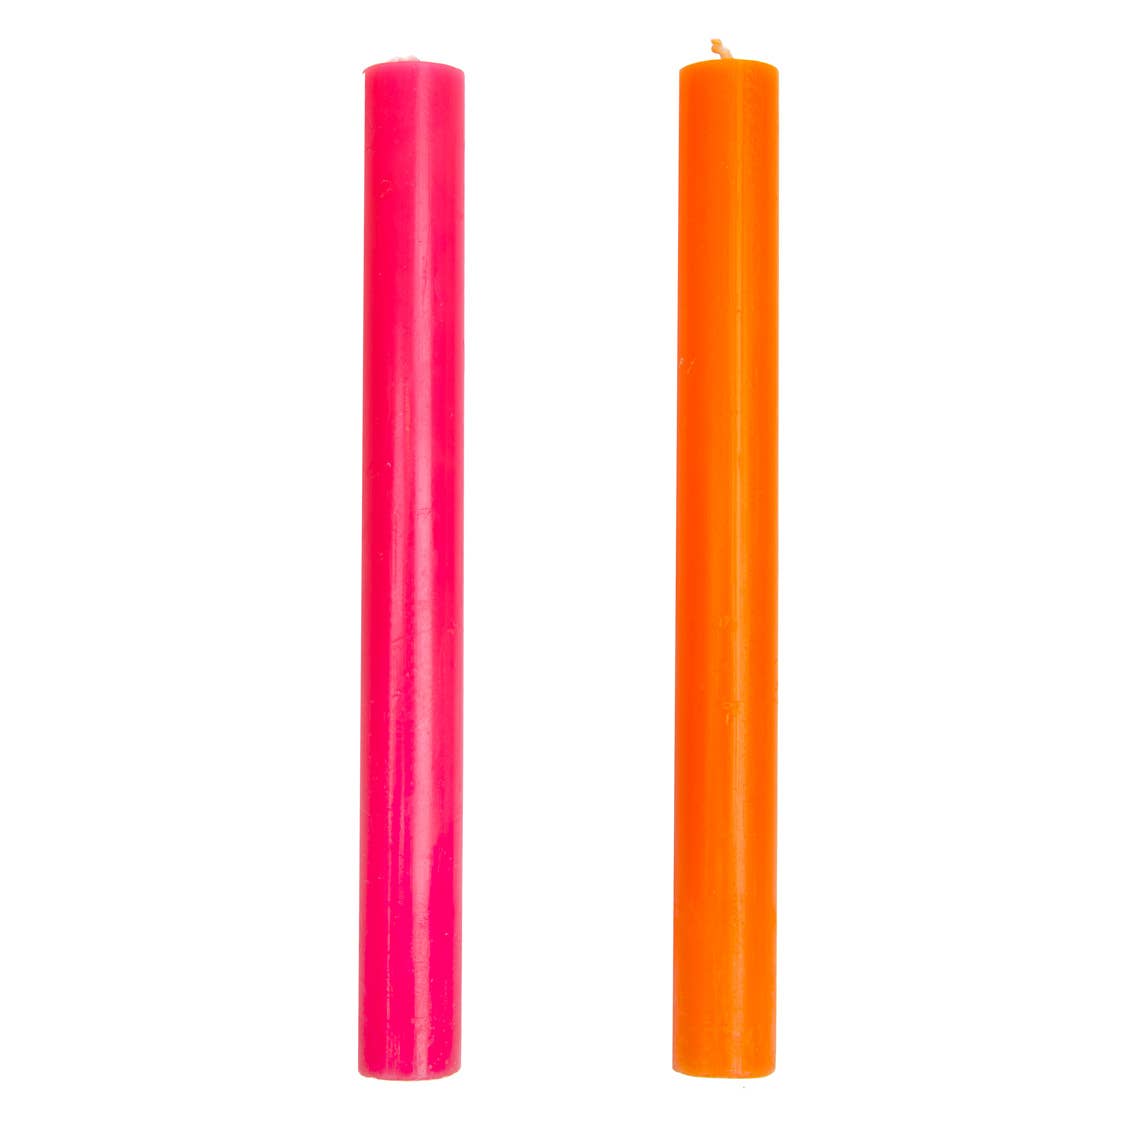 Inner Orange and Pink Dinner Candles - Home Décor